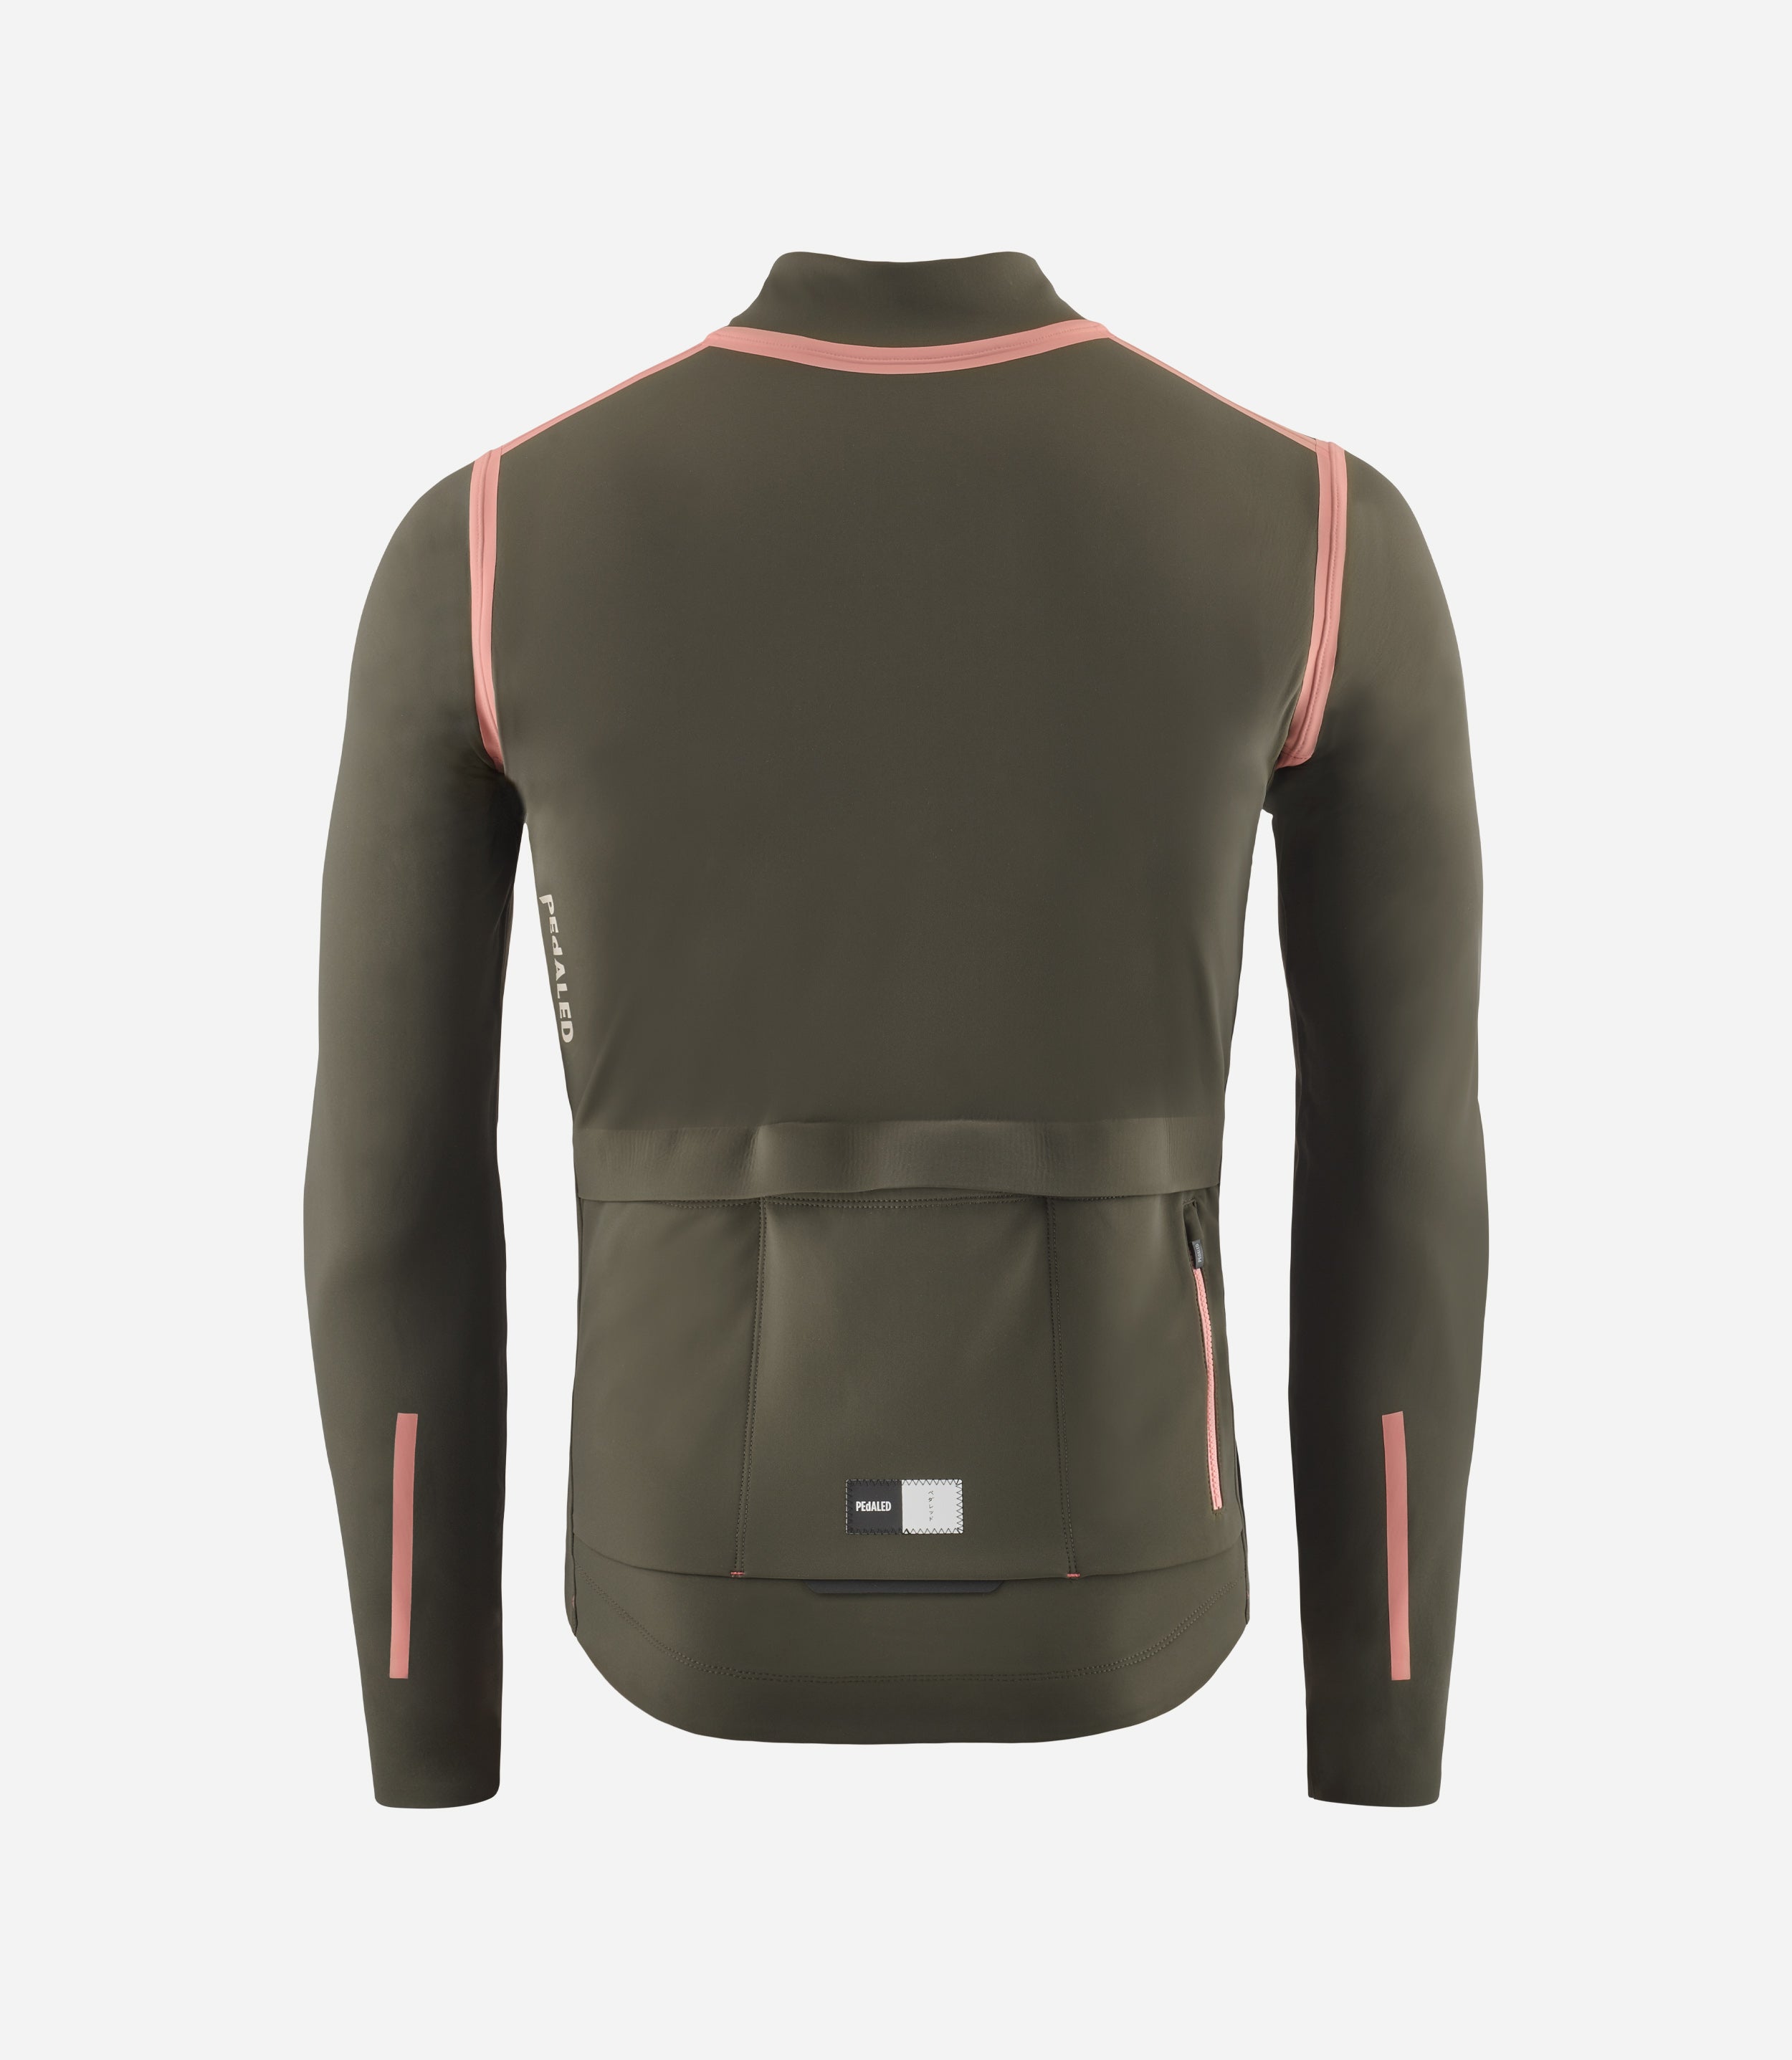 Odyssey waterproof thermo jacket<BR/>